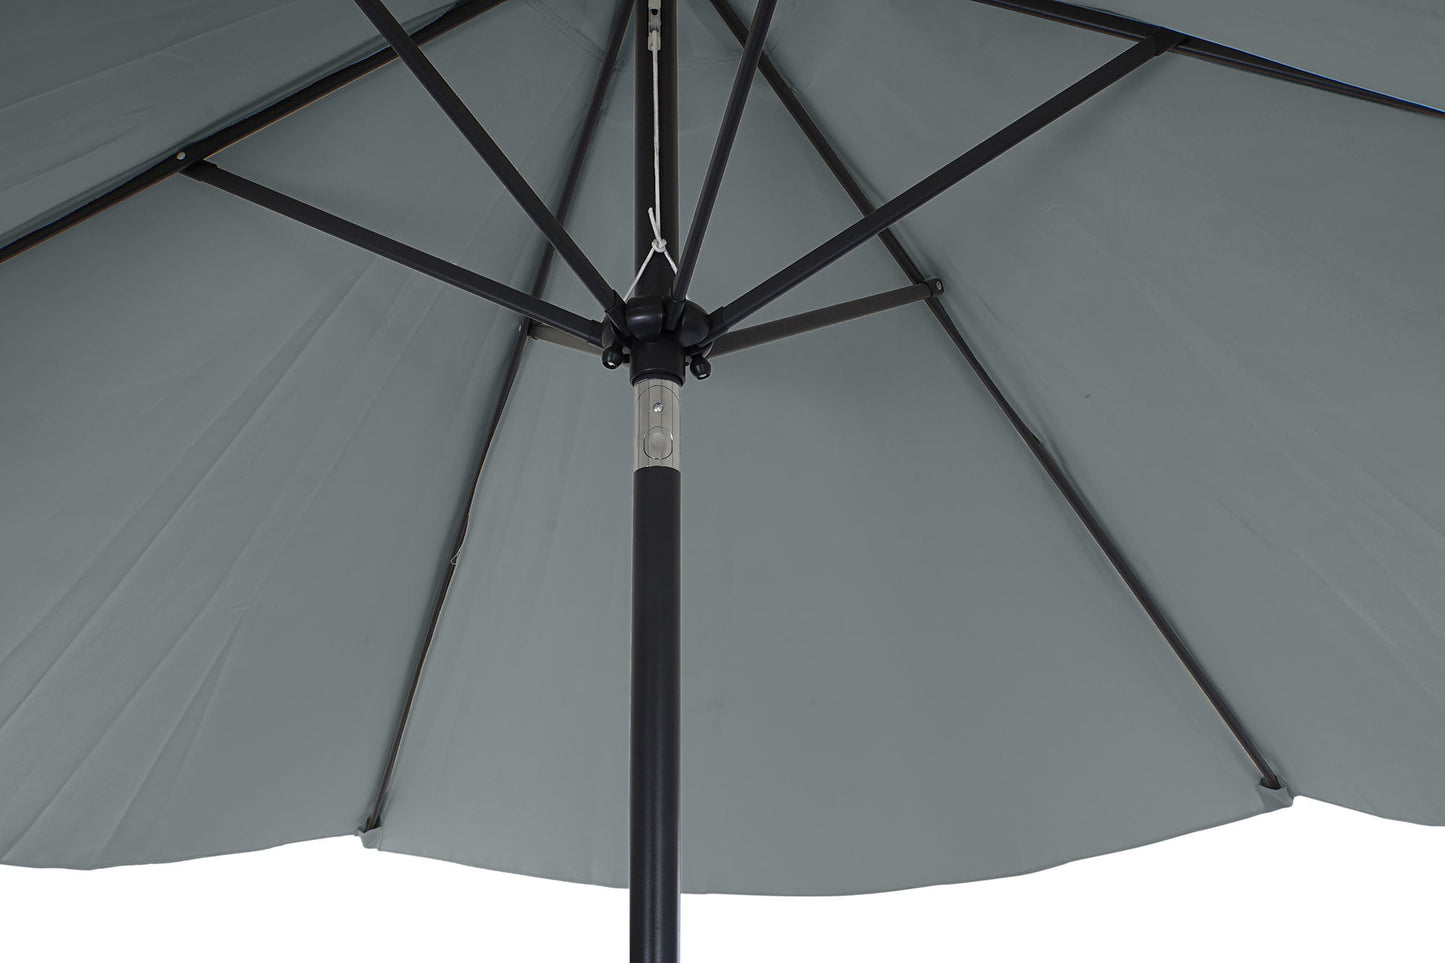 Parasol Inclinable Gris